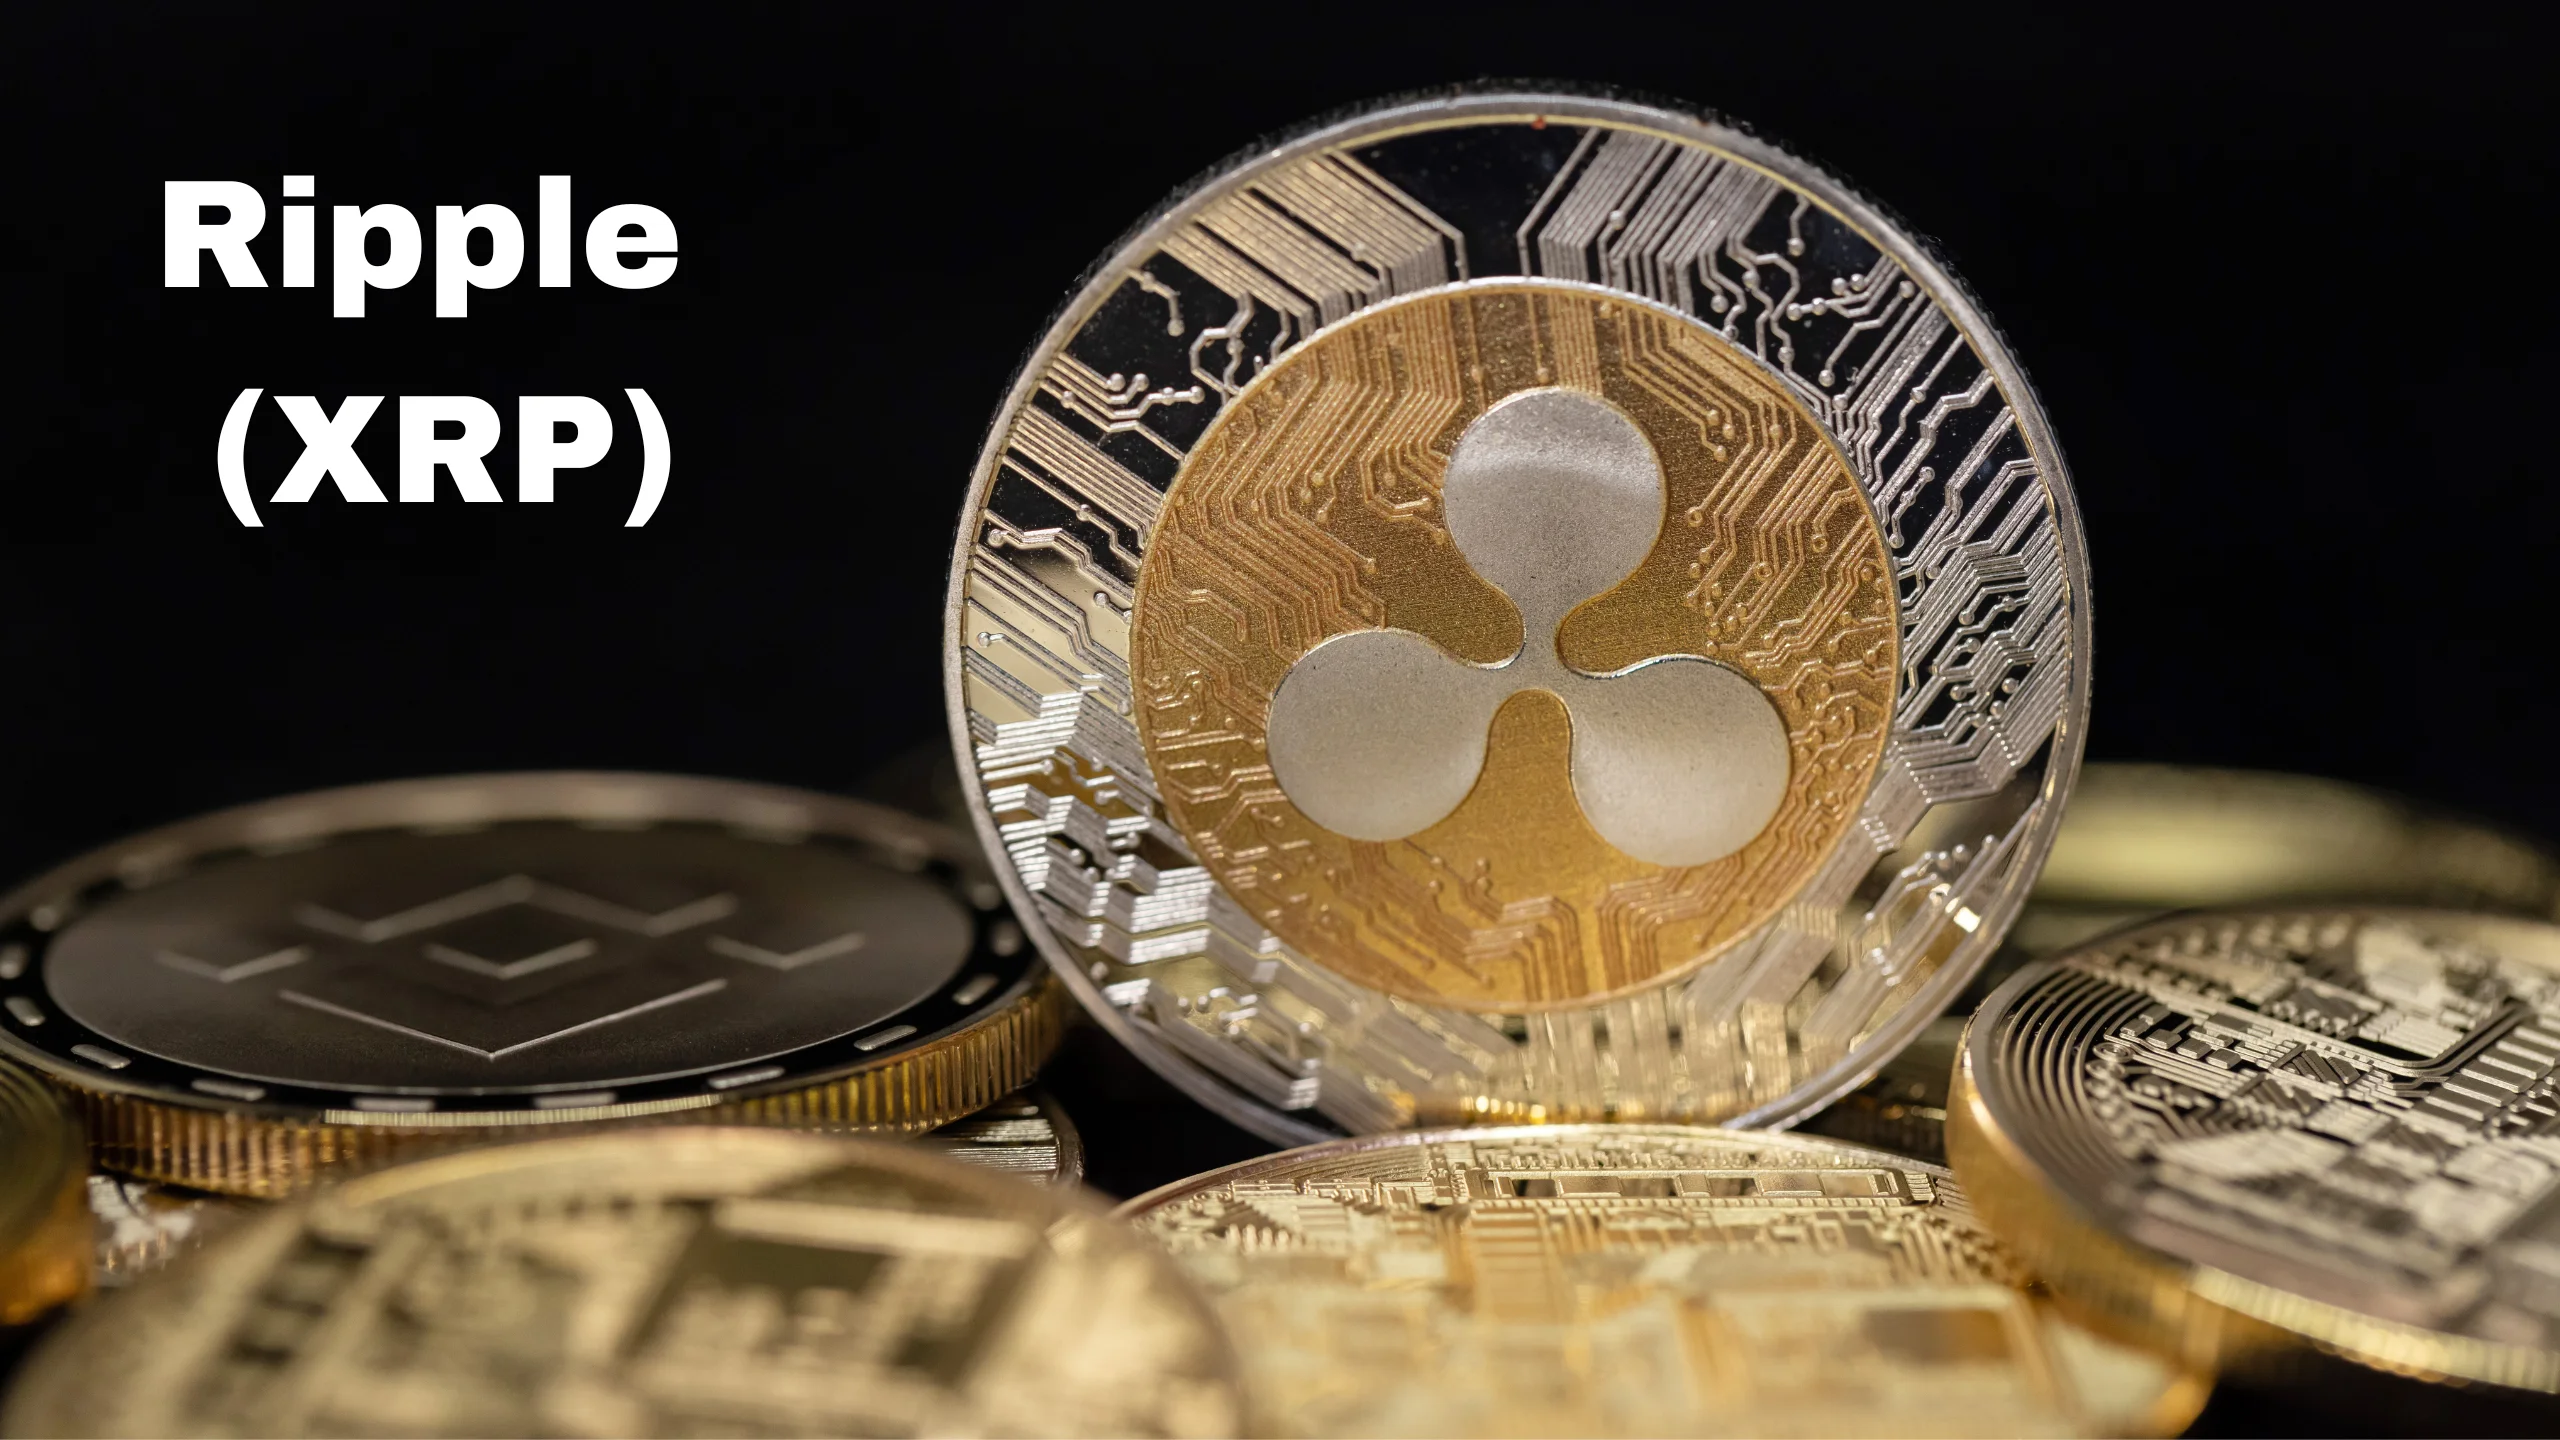 Discover the unique features and benefits of Ripple (XRP) in the cryptocurrency landscape. Learn how XRP facilitates fast, low-cost cross-border transactions and its role in the financial industry.